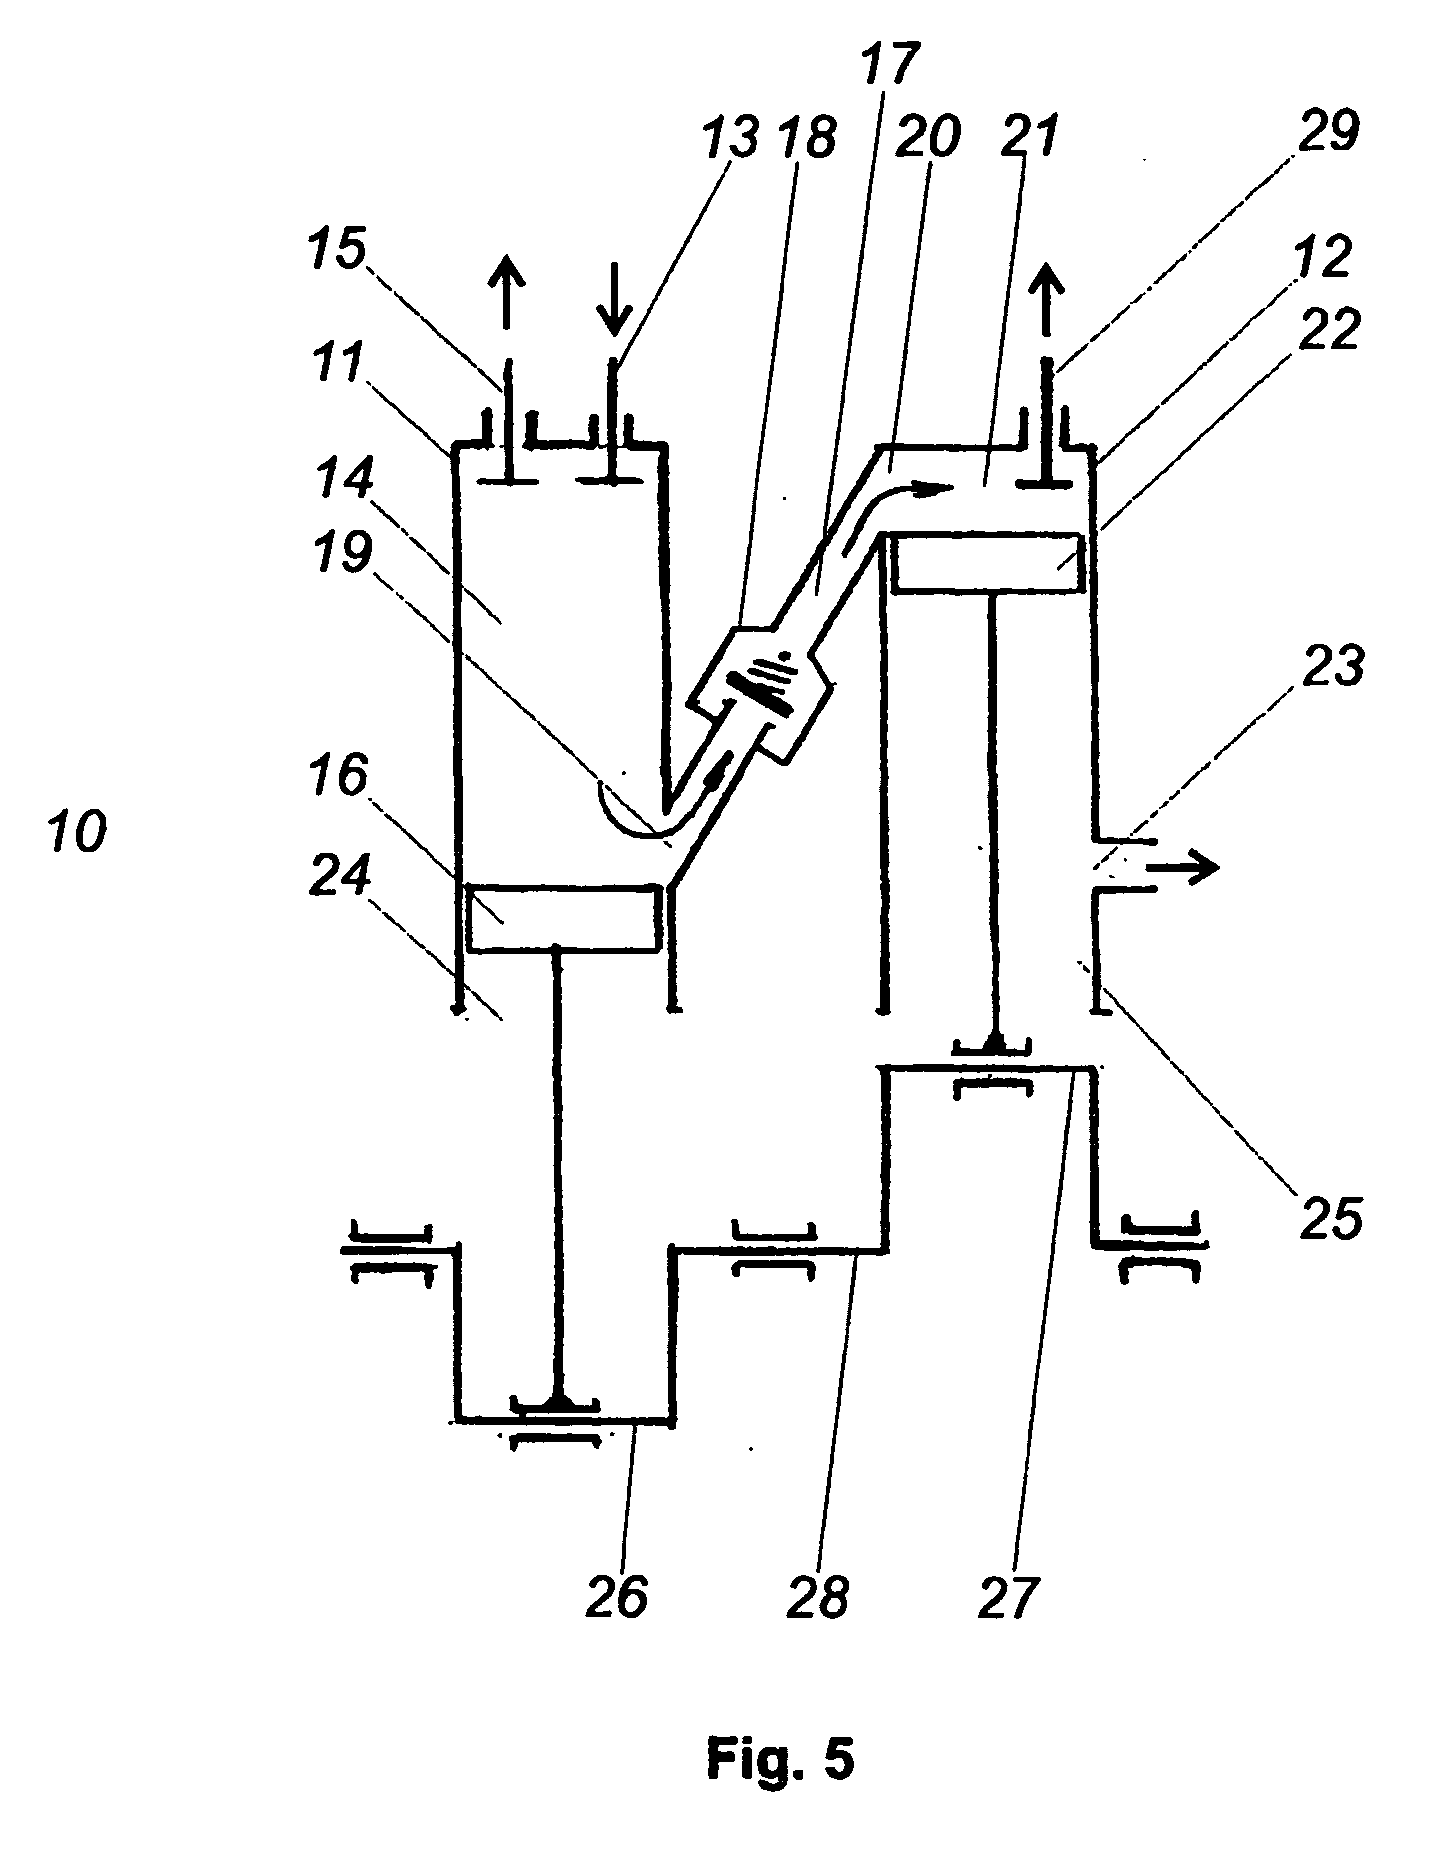 Method for operating and arrangement of a pneumatic piston engine